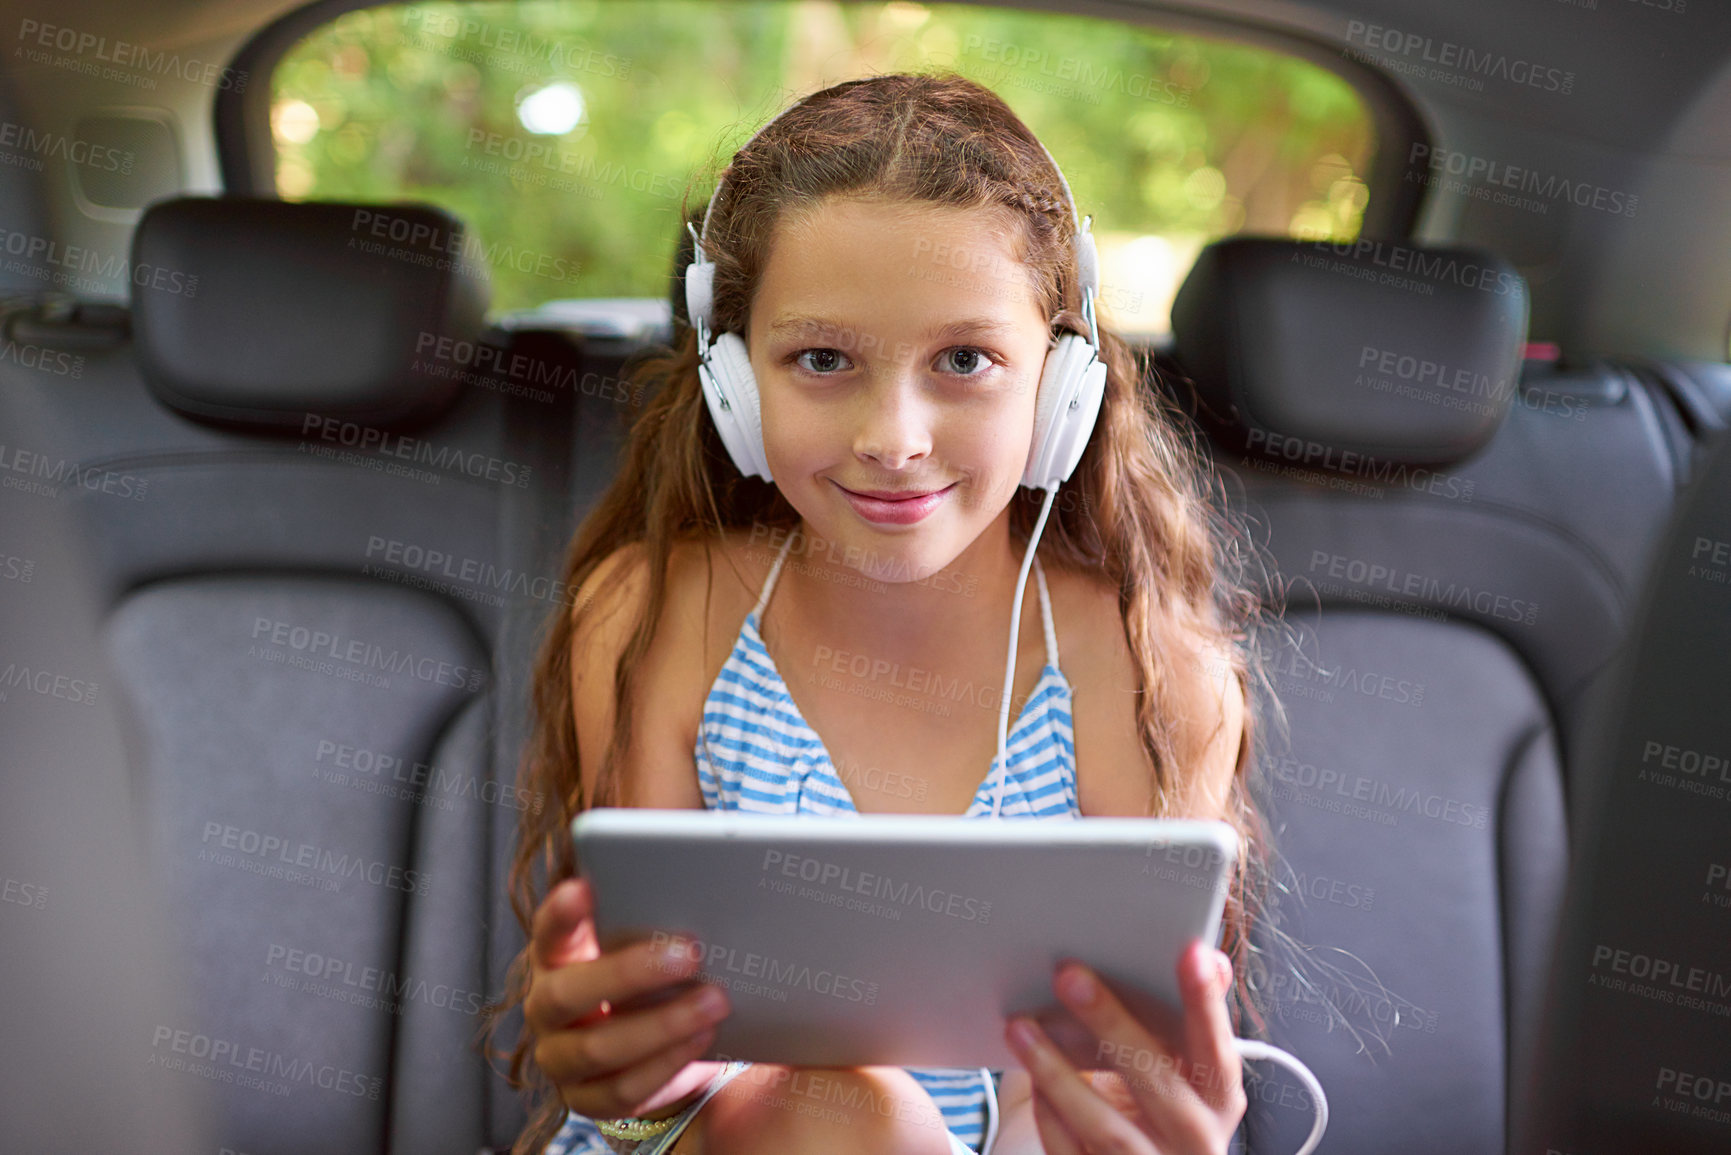 Buy stock photo Shot of a young girl sitting in a car backseat wearing headphones and using a digital tablet